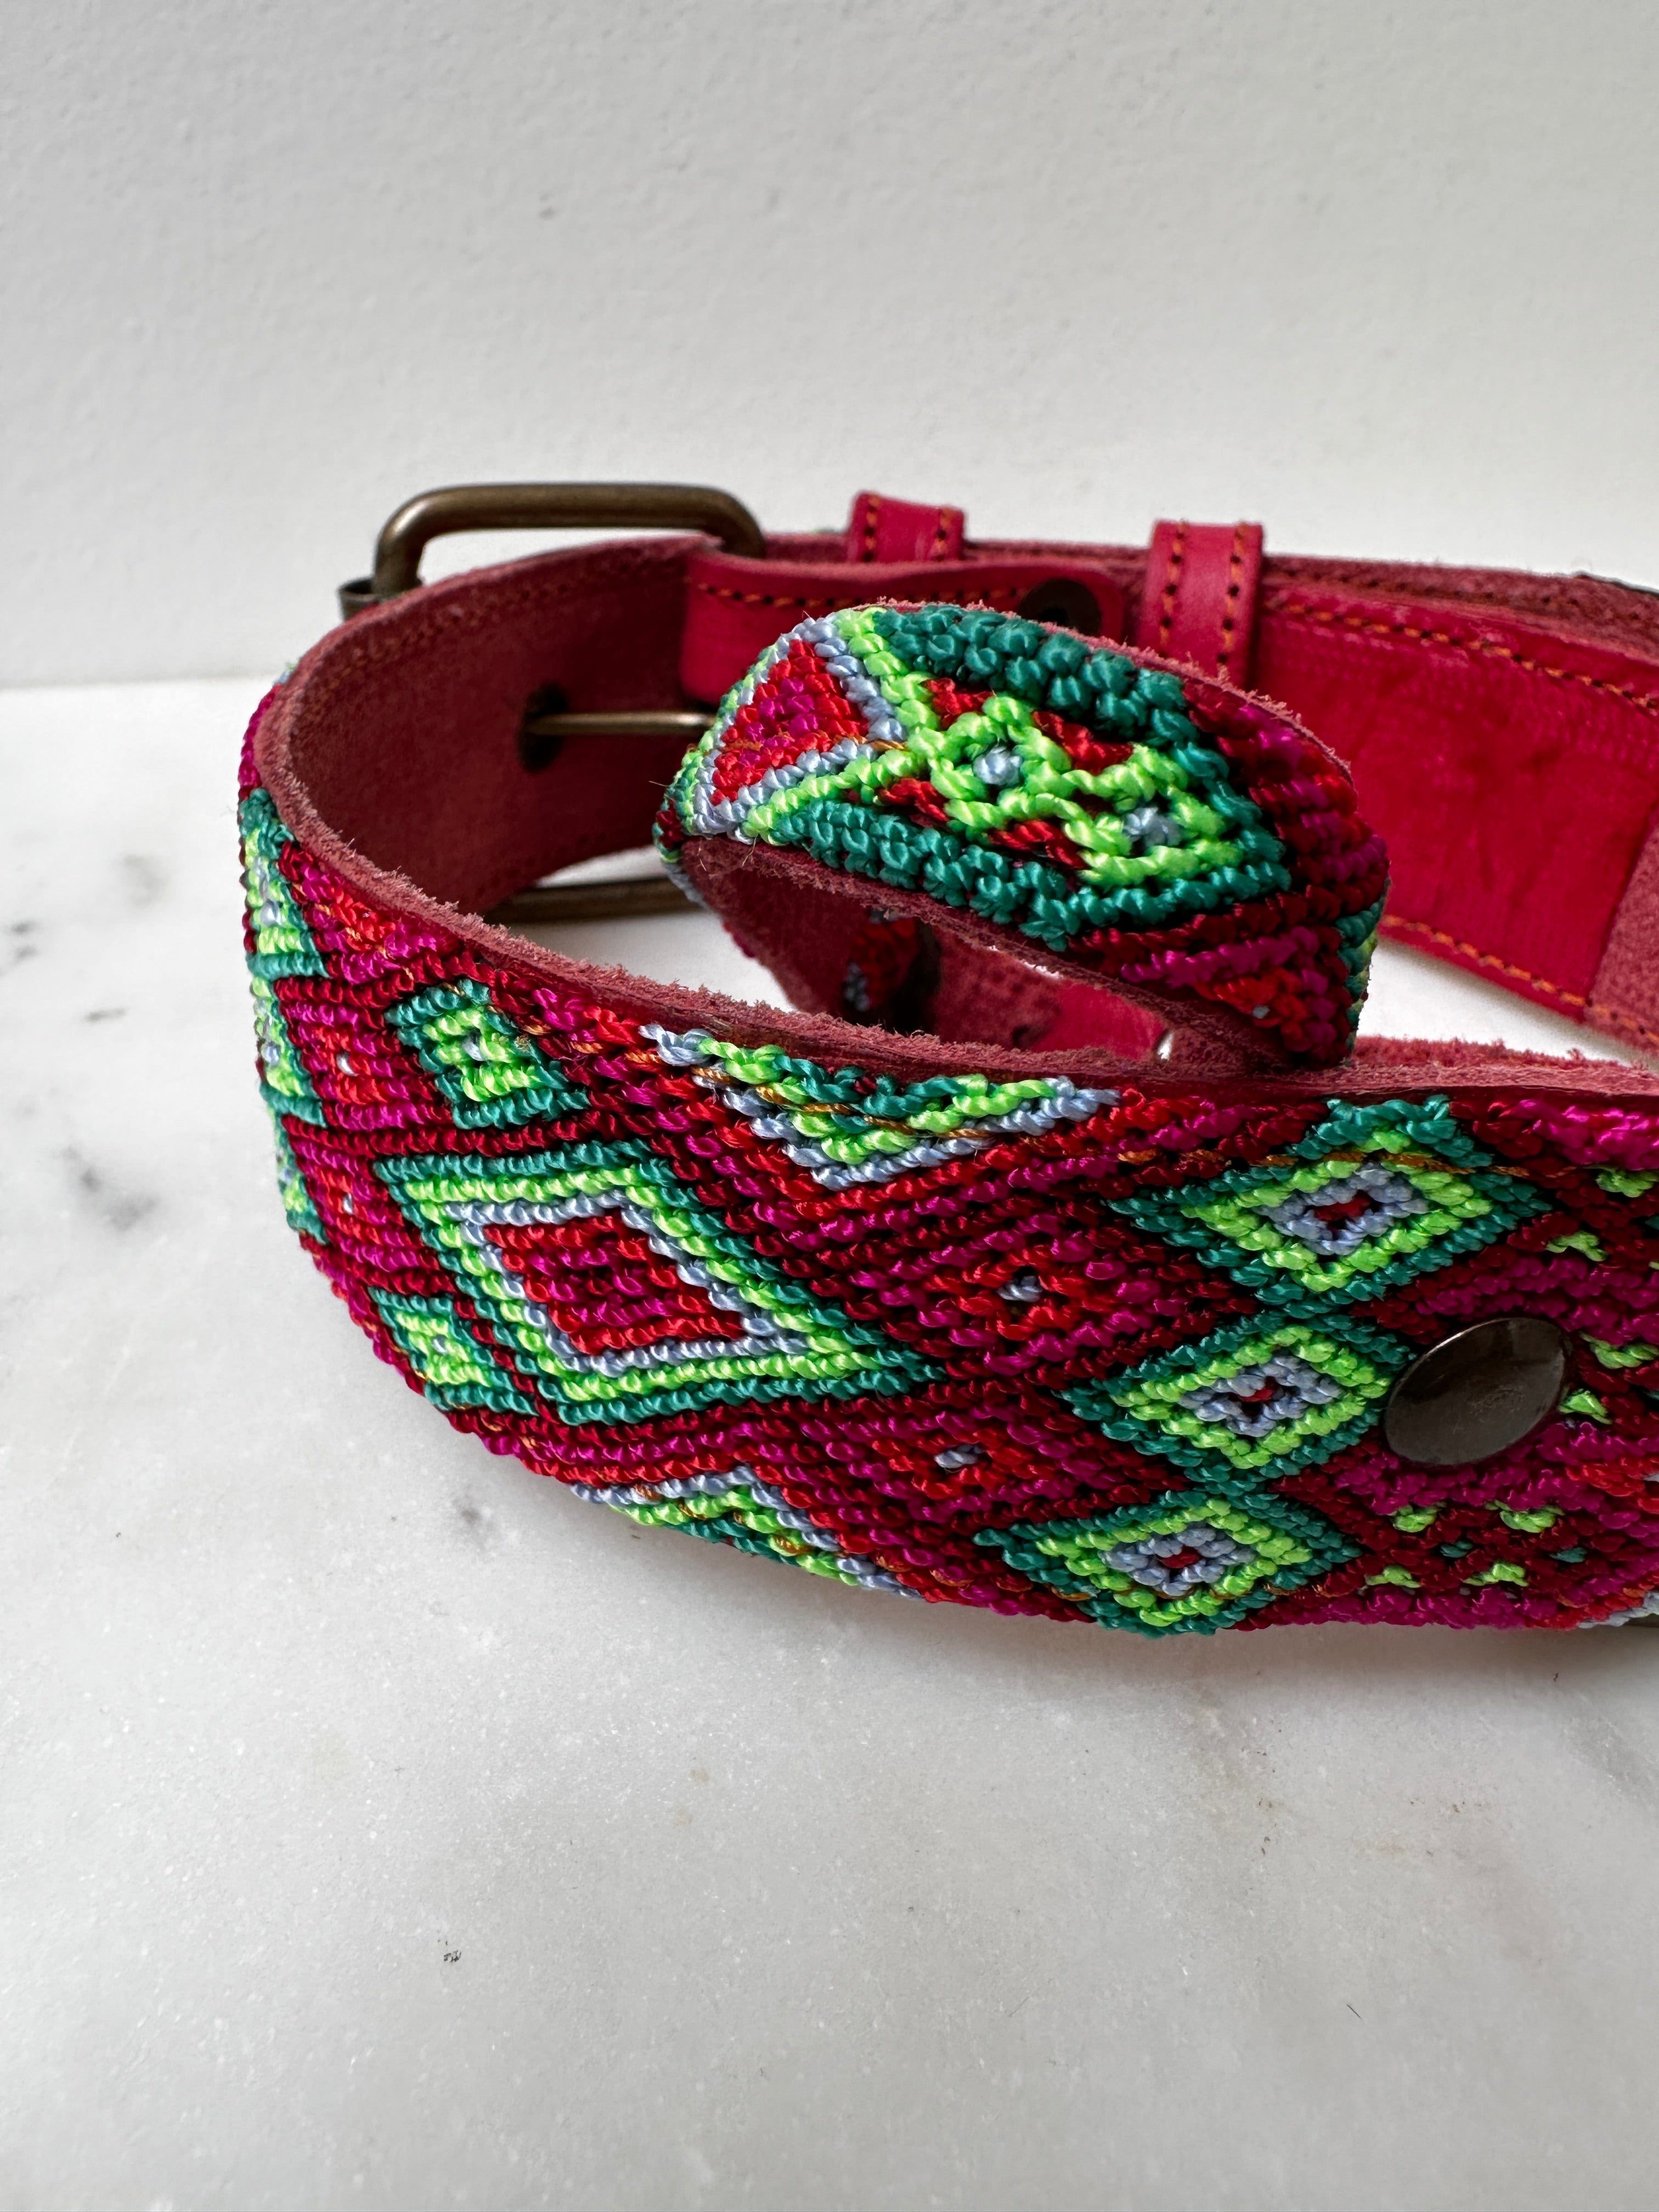 Future Nomads Homewares One Size Huichol Embroidered Wide Dog Collar M6